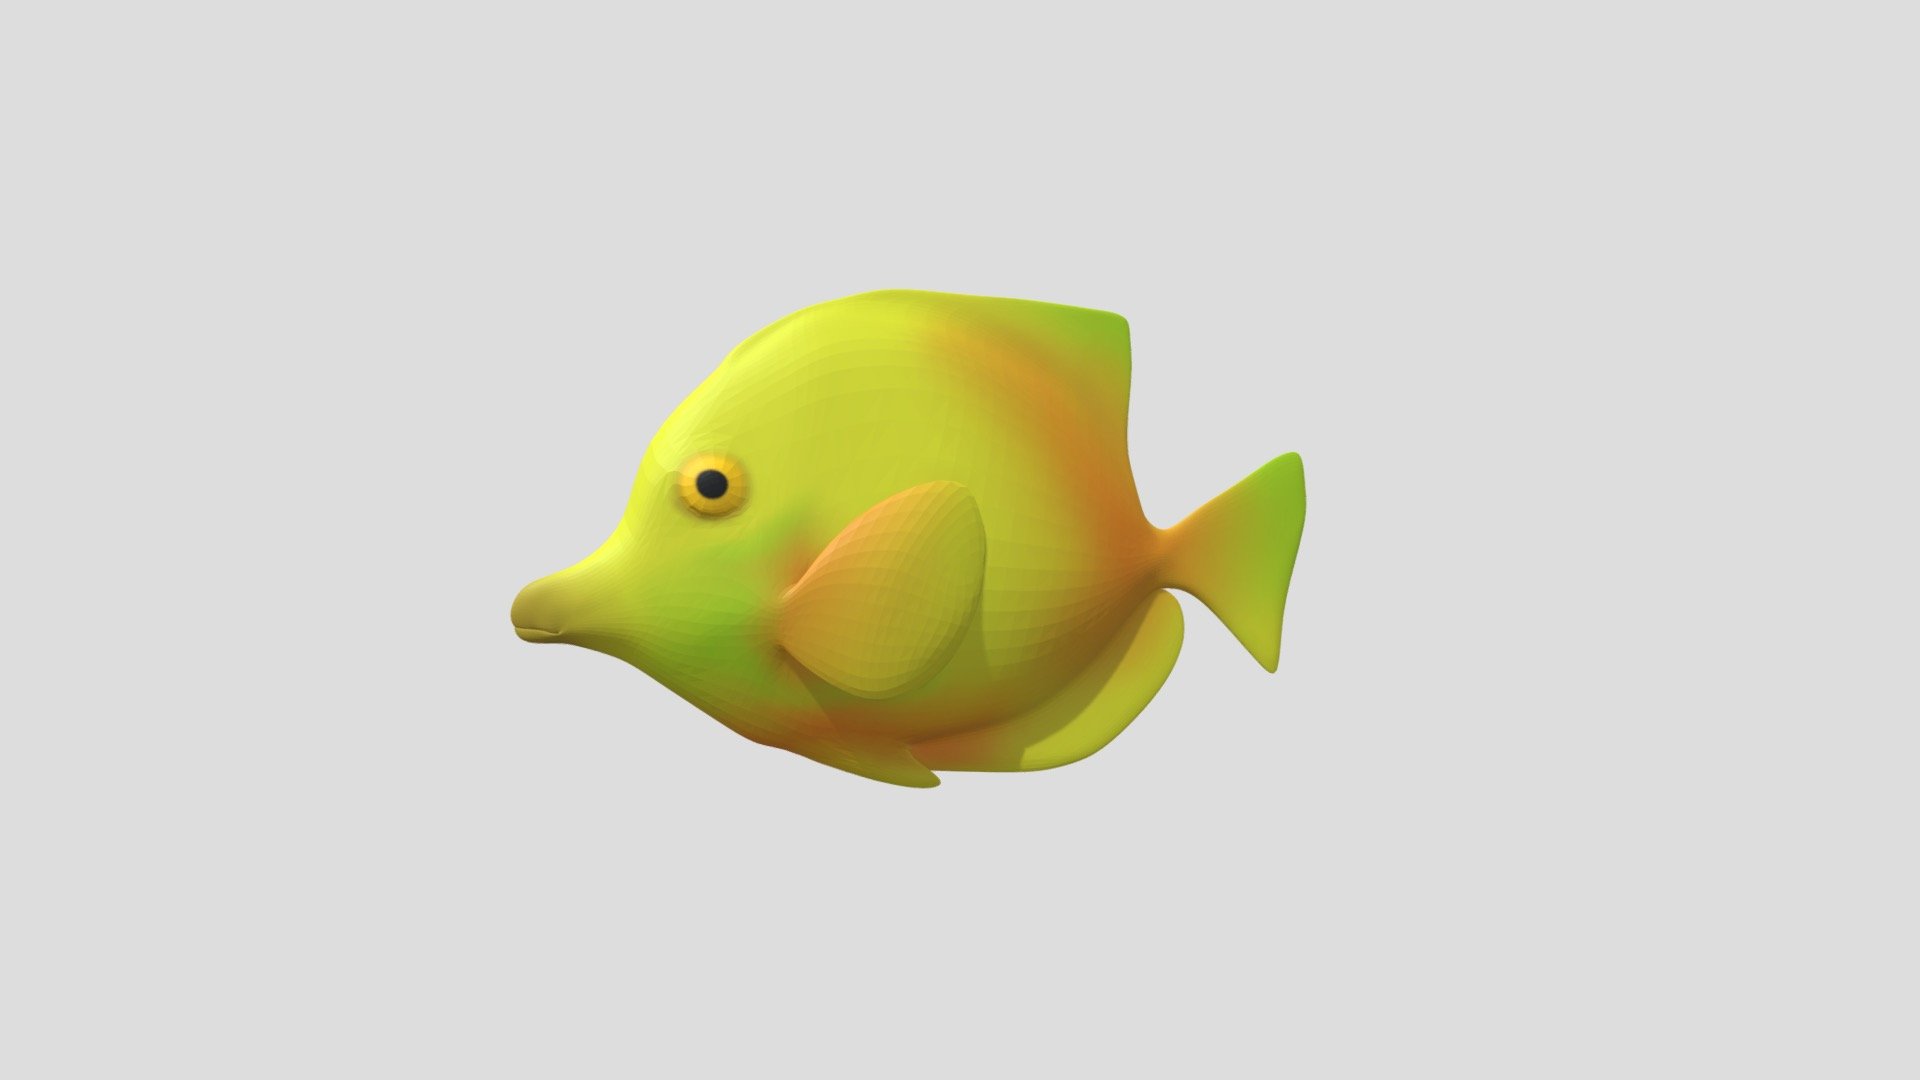 Subdivision: 2

Rigged

Textures: 1024 x 1024

Two textures: YellowFish and YellowFish2 You can use one of them, the difference is eye color

Has Normal Map

I hope you enjoy the model 3d model